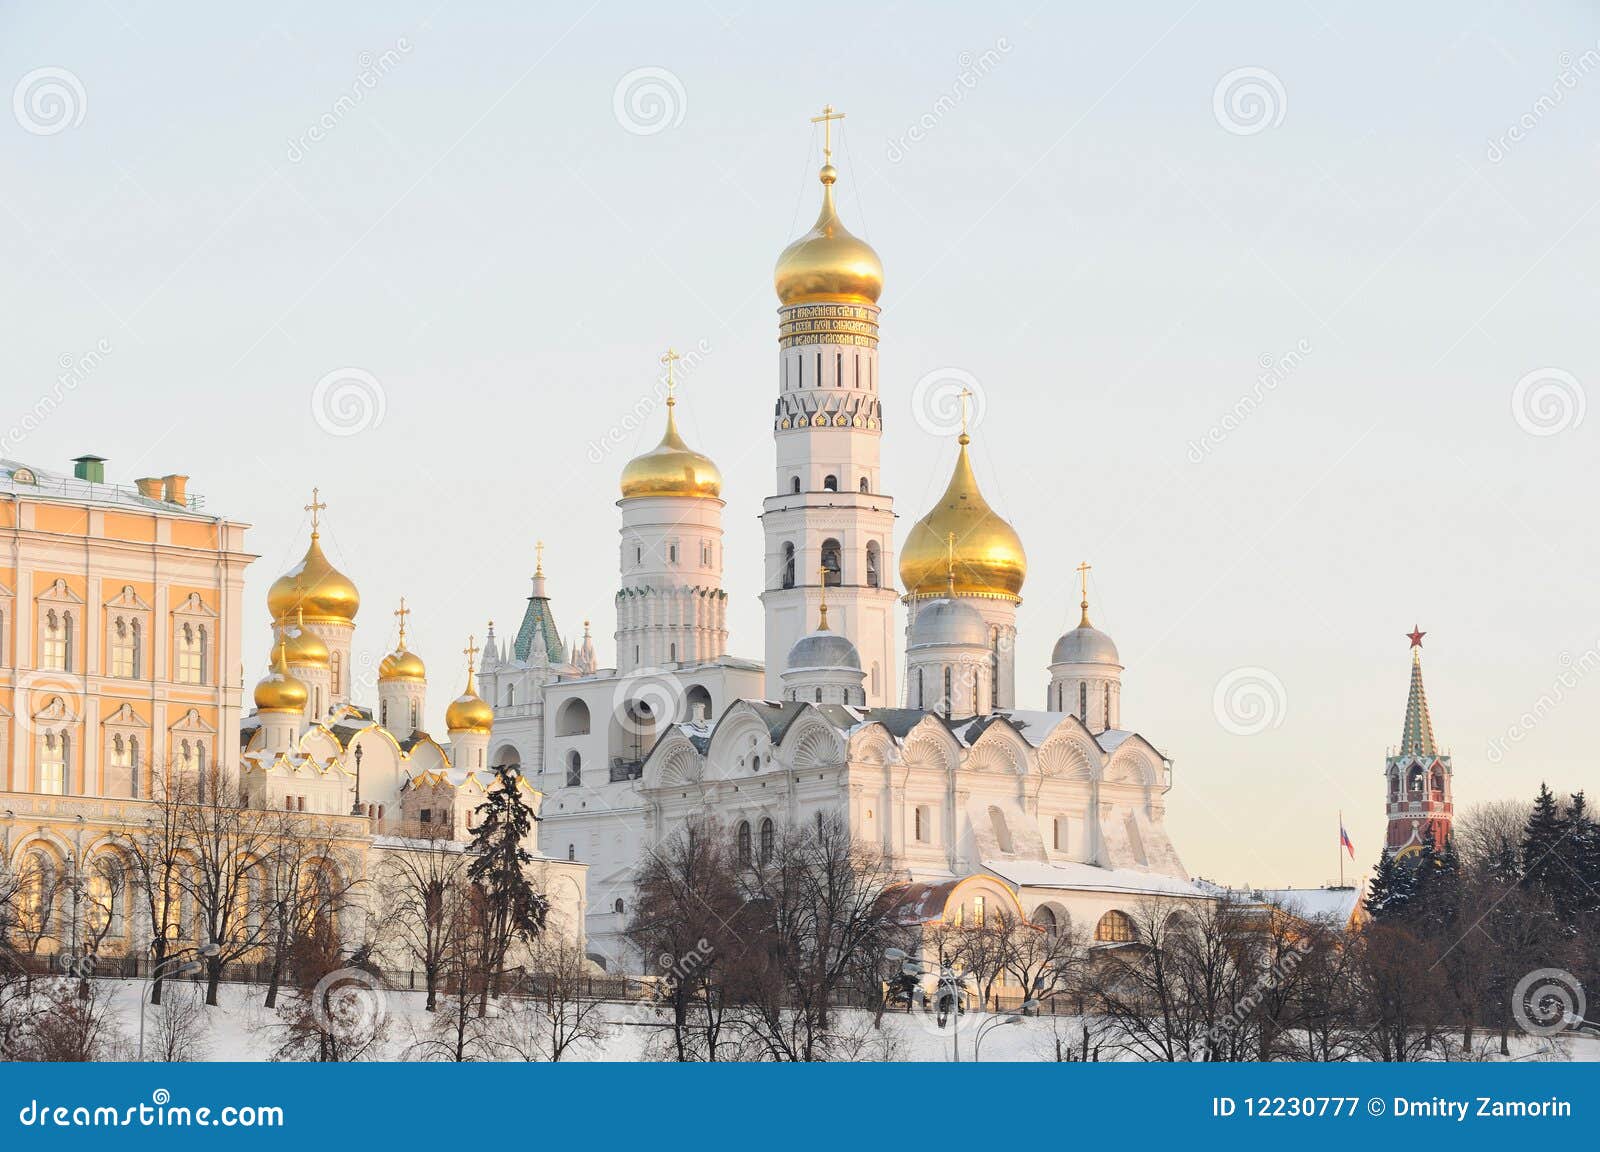 russia. ensemble of moscow kremlin in a winter